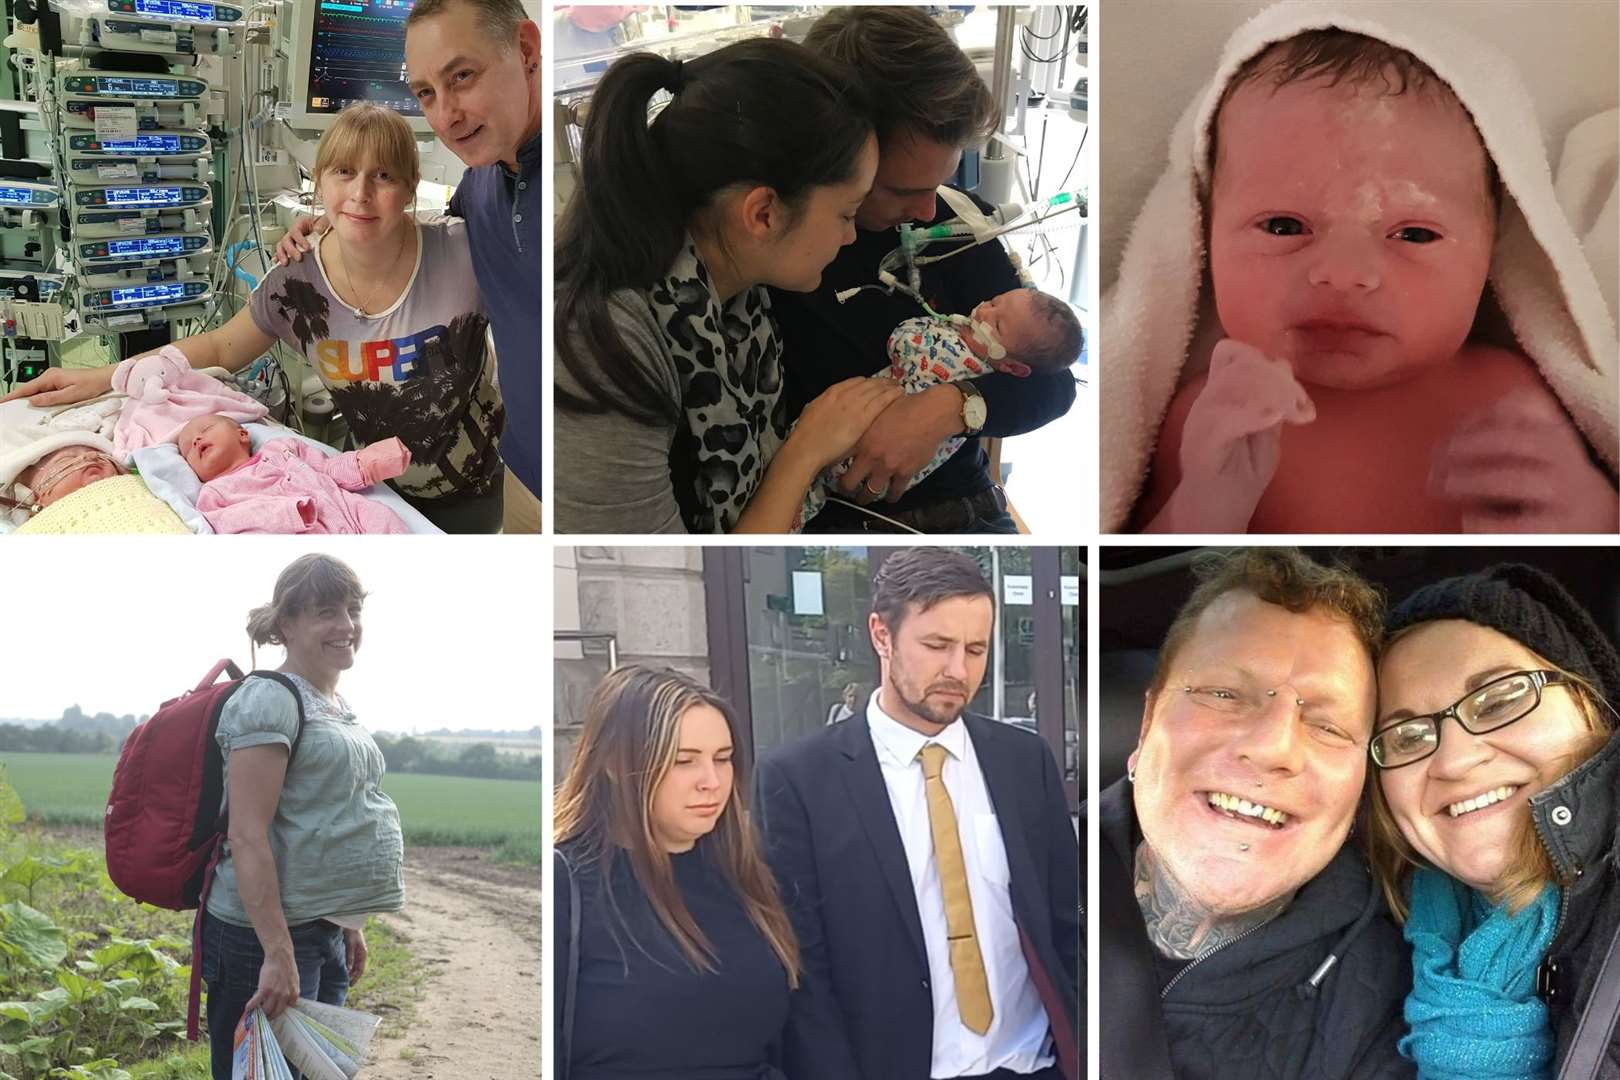 These are the stories of the human cost of the East Kent Hospitals baby death scandal